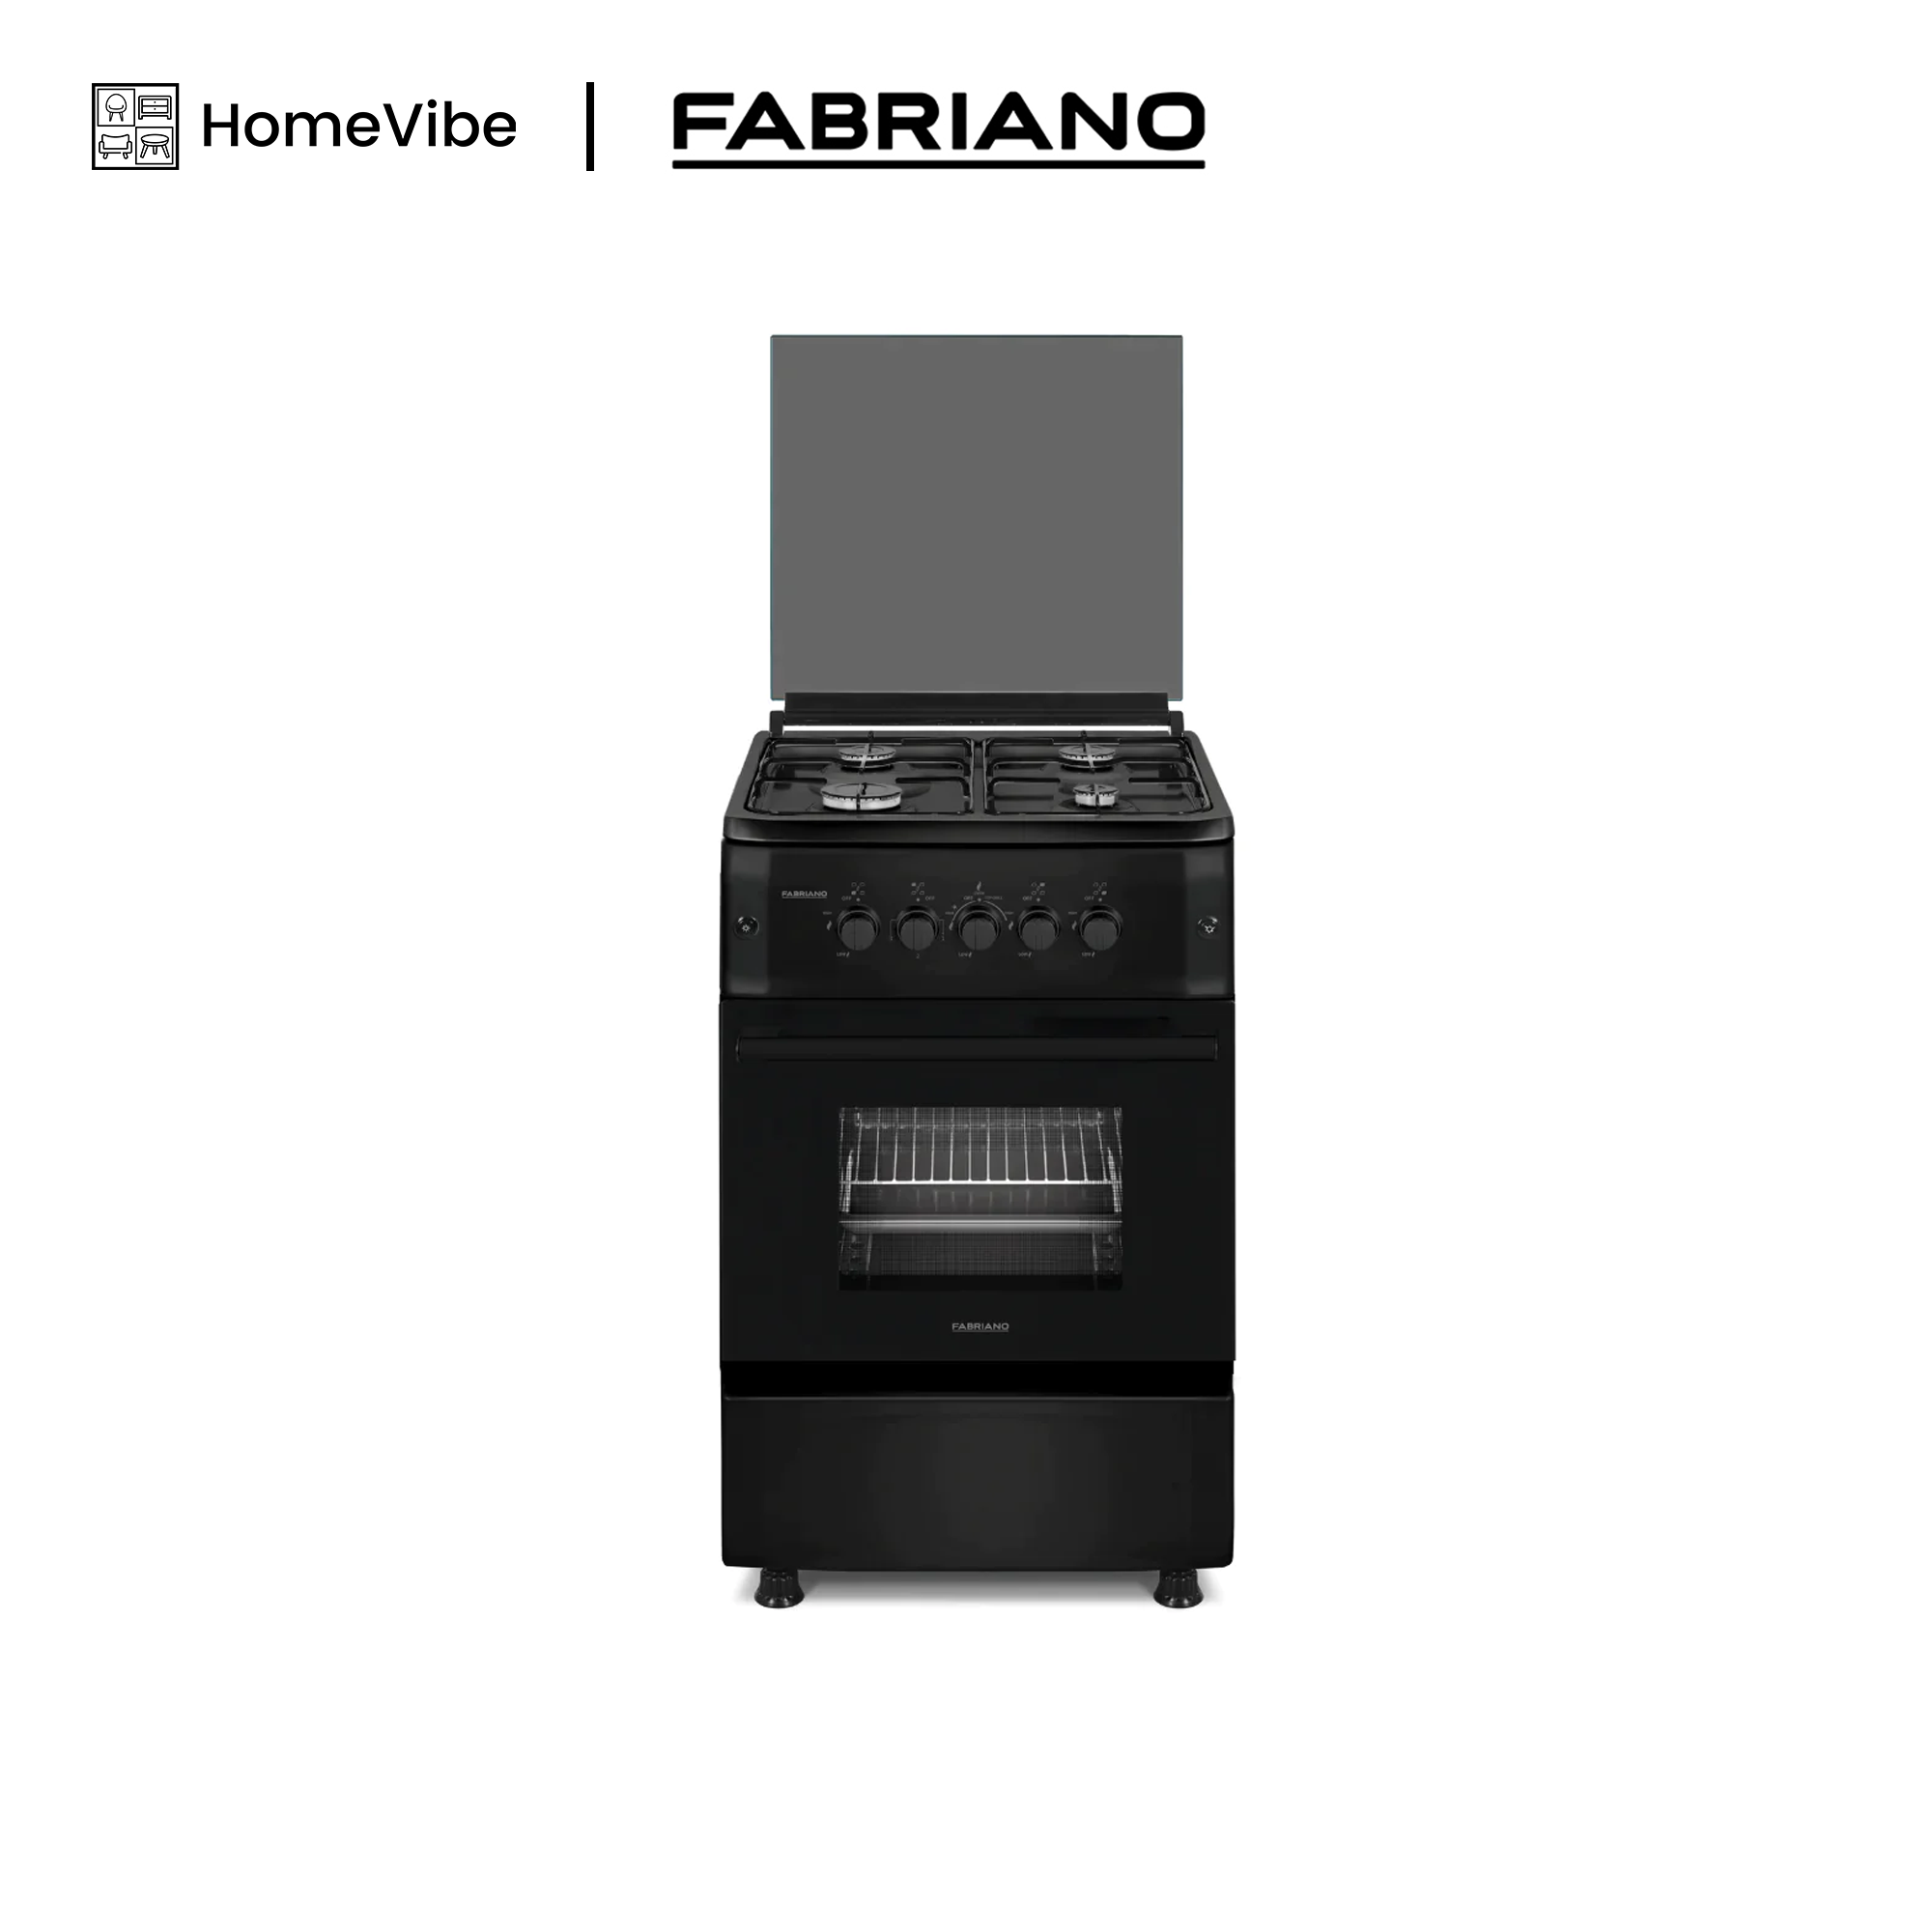 Fabriano 50cm, 4 Gas Burners + Gas Oven Free Standing Cooker F5S40G2-BL